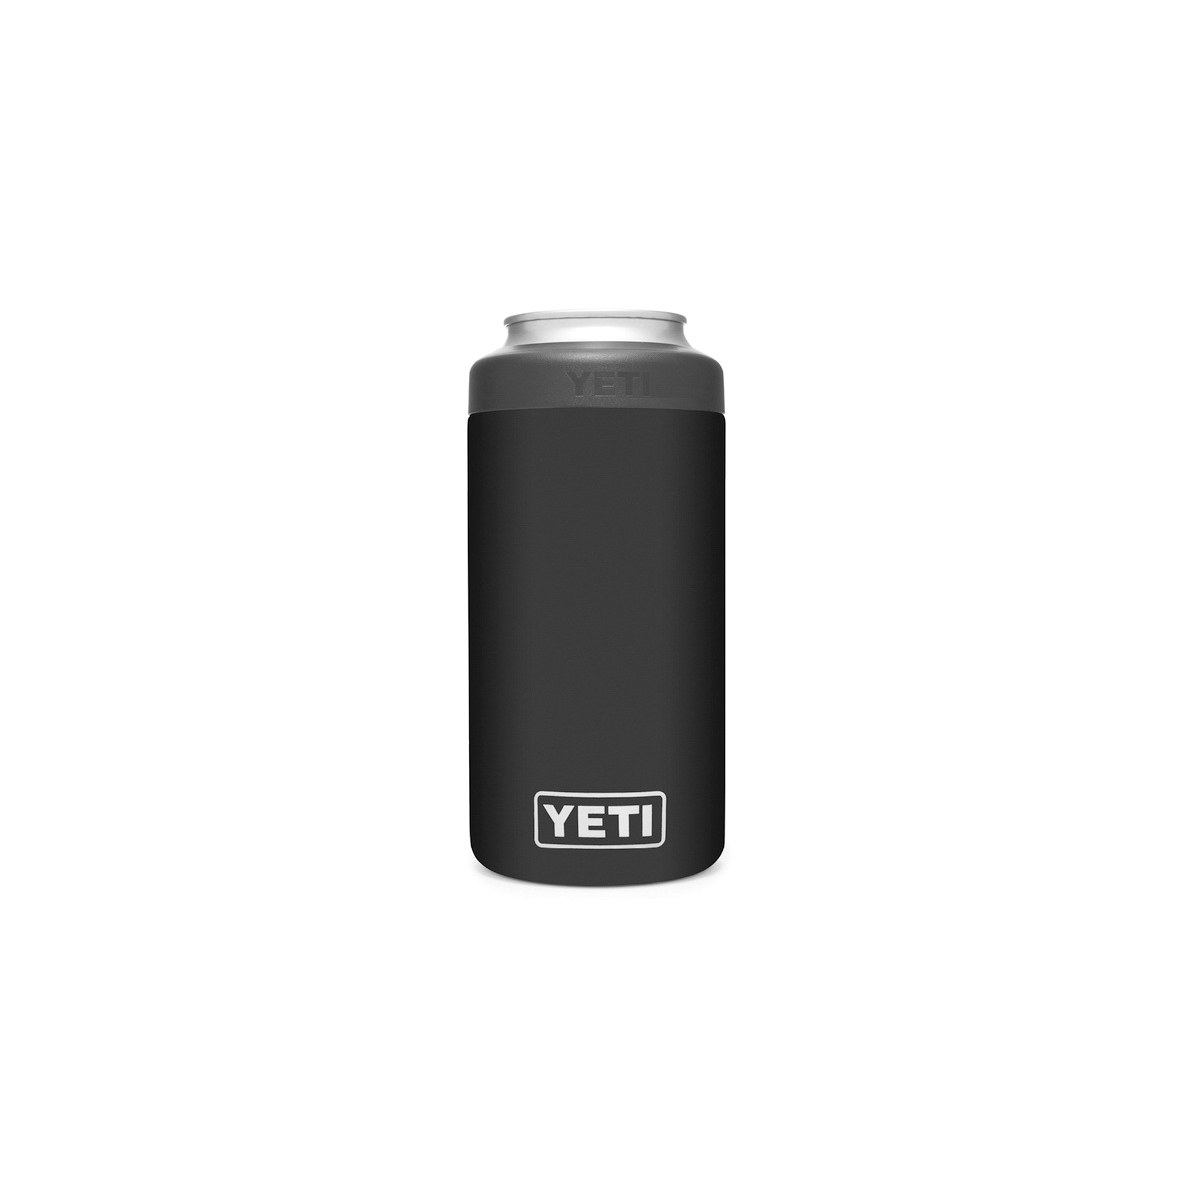 YETI Rambler 21070090051 Colster Can Insulator, 3 in Dia x 6 in H, 16 oz Can/Bottle, Stainless Steel, Black - 1